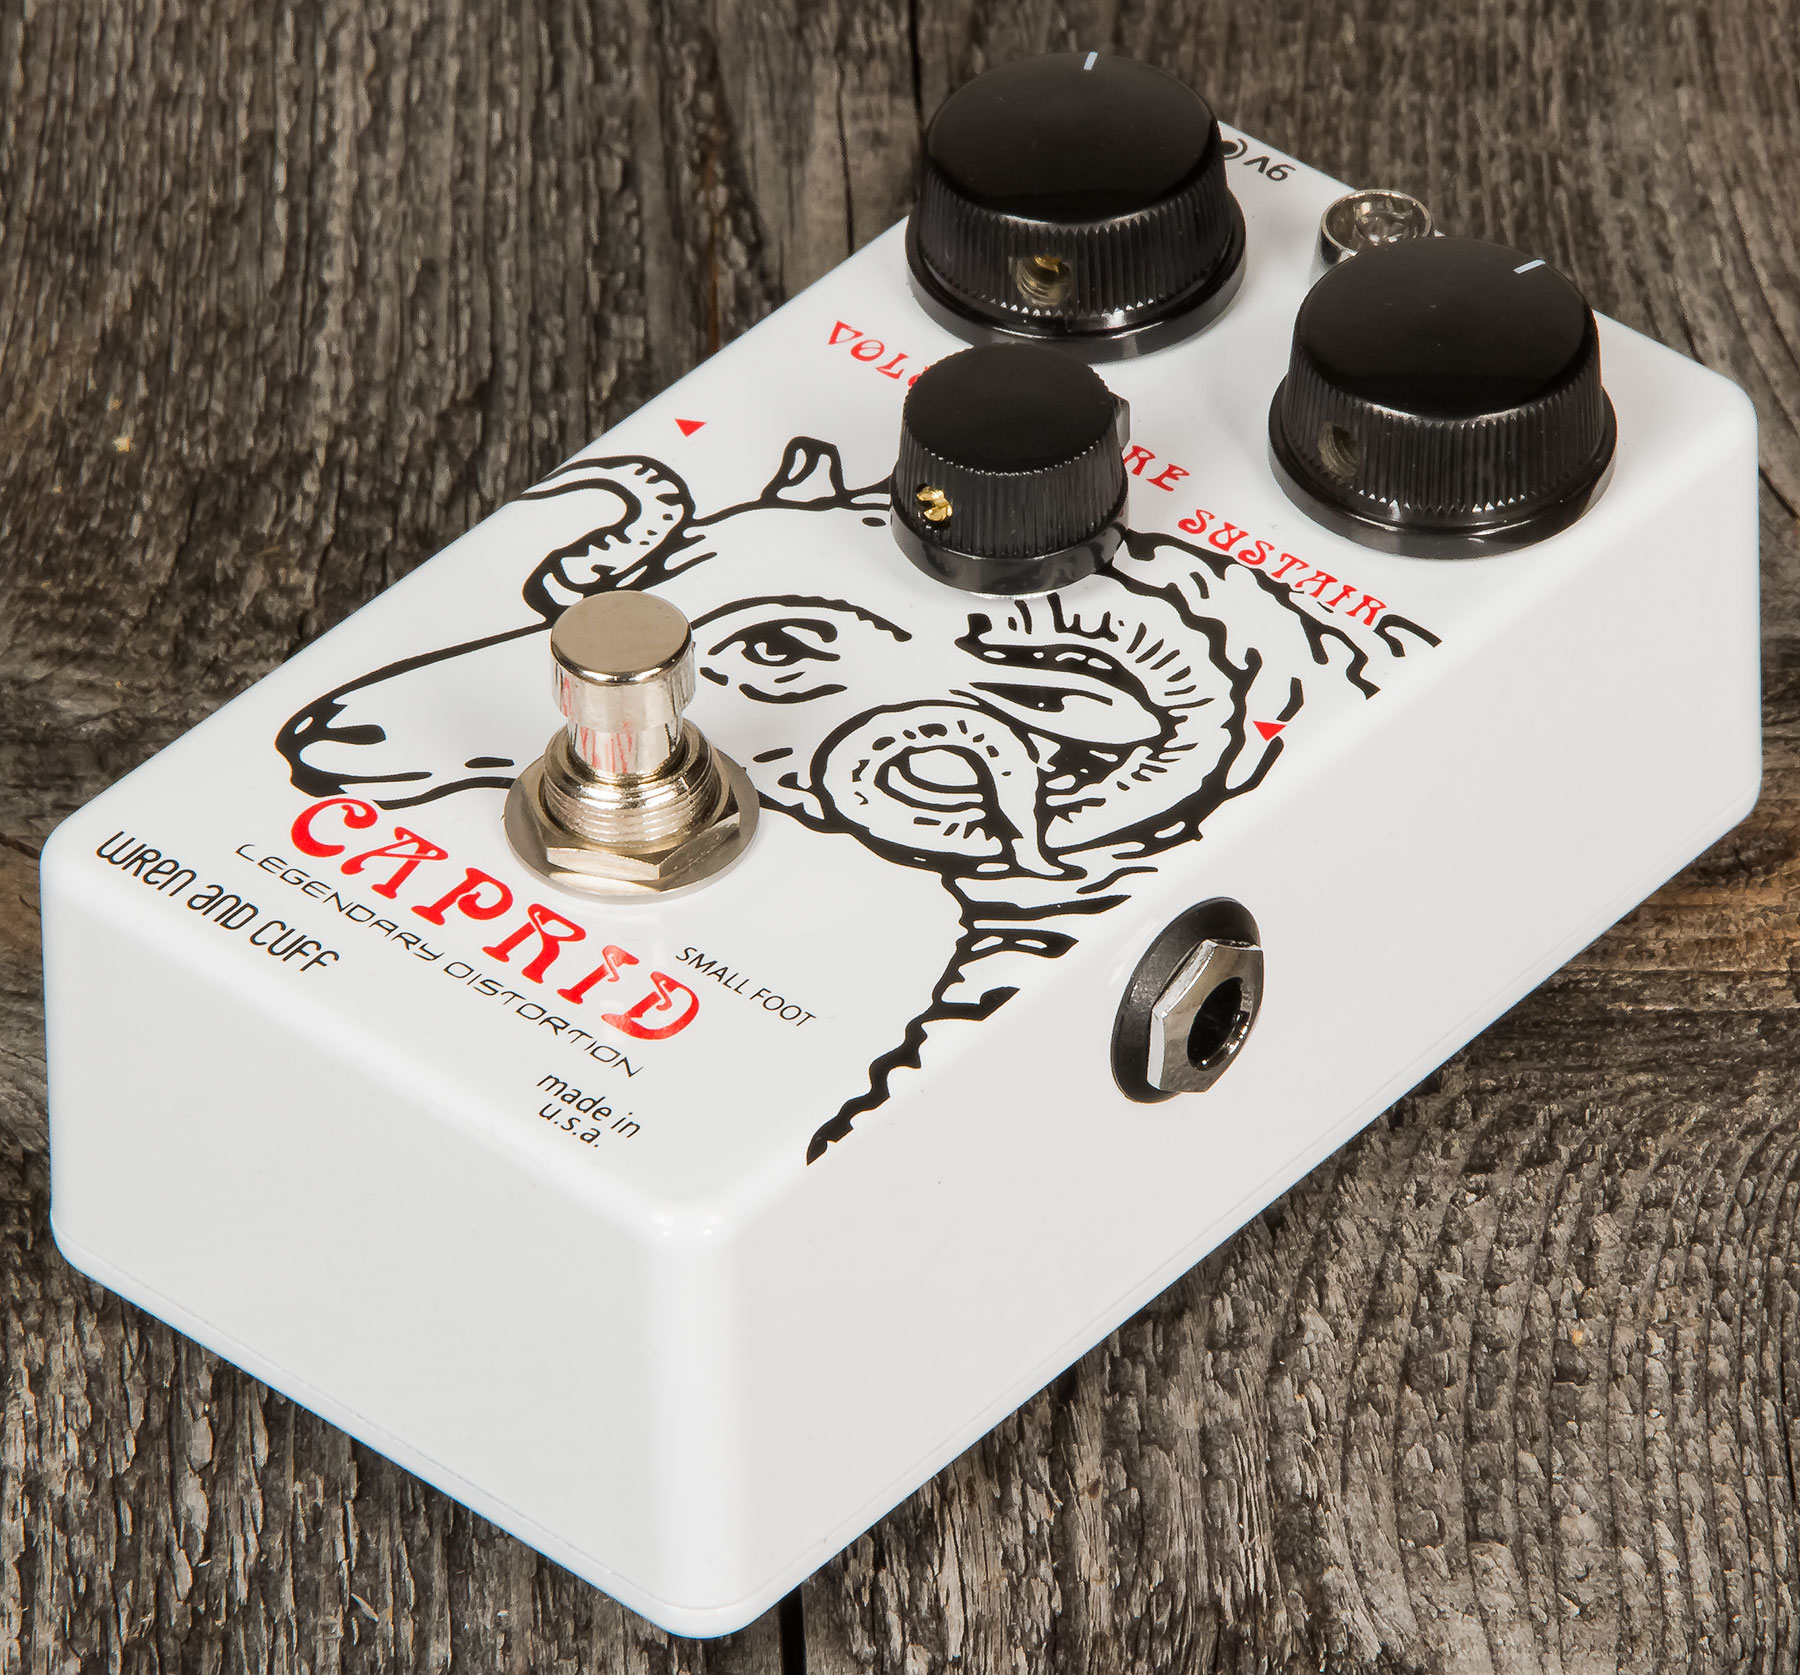 Wren And Cuff Caprid Small Foot Legendary Distortion - Overdrive, distortion & fuzz effect pedal - Variation 1